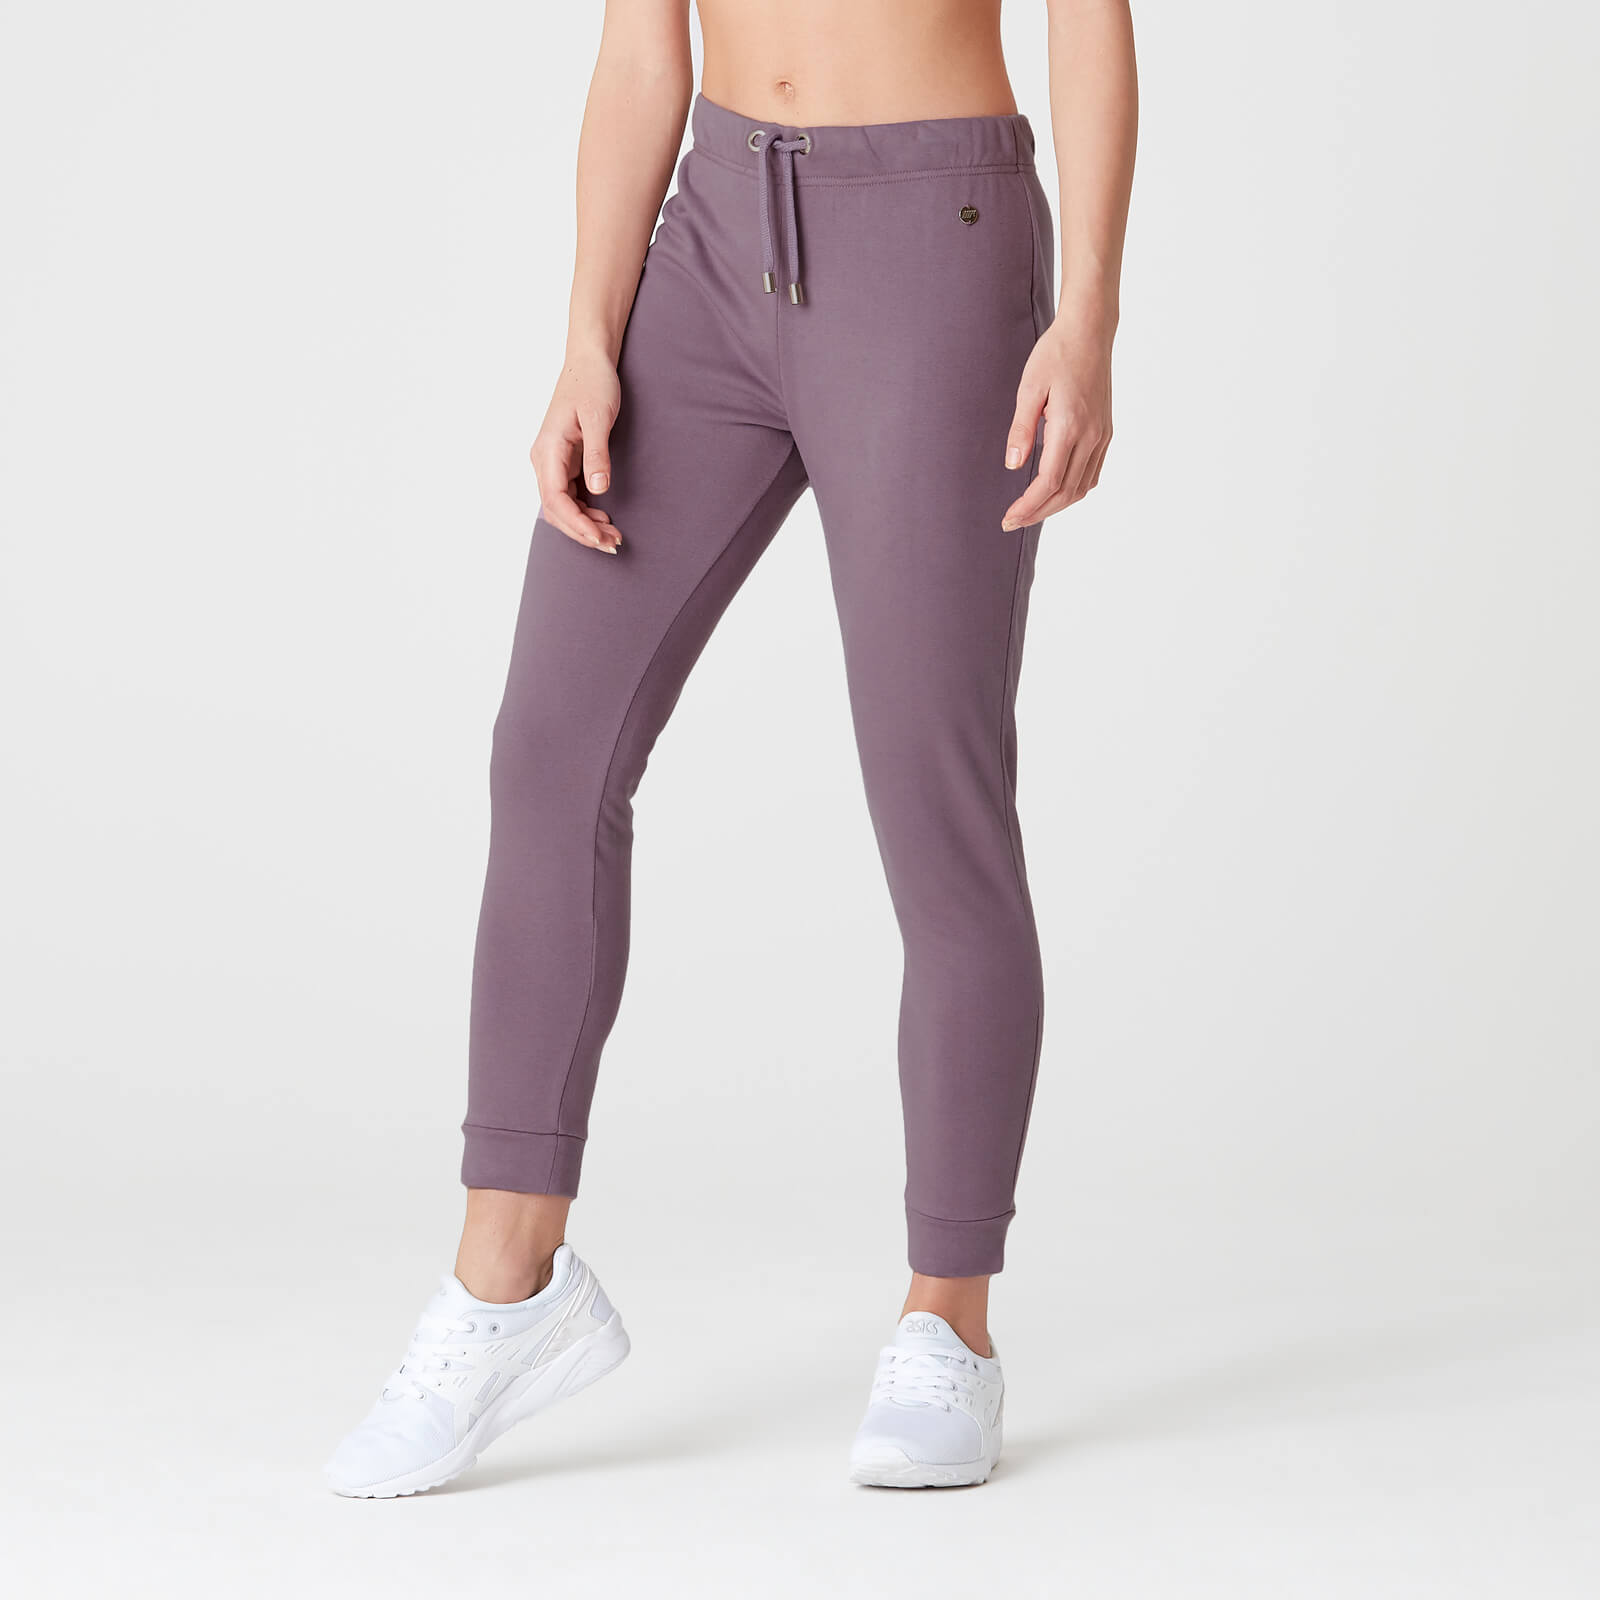 Myprotein Luxe Lounge Jogger - Mauve - S